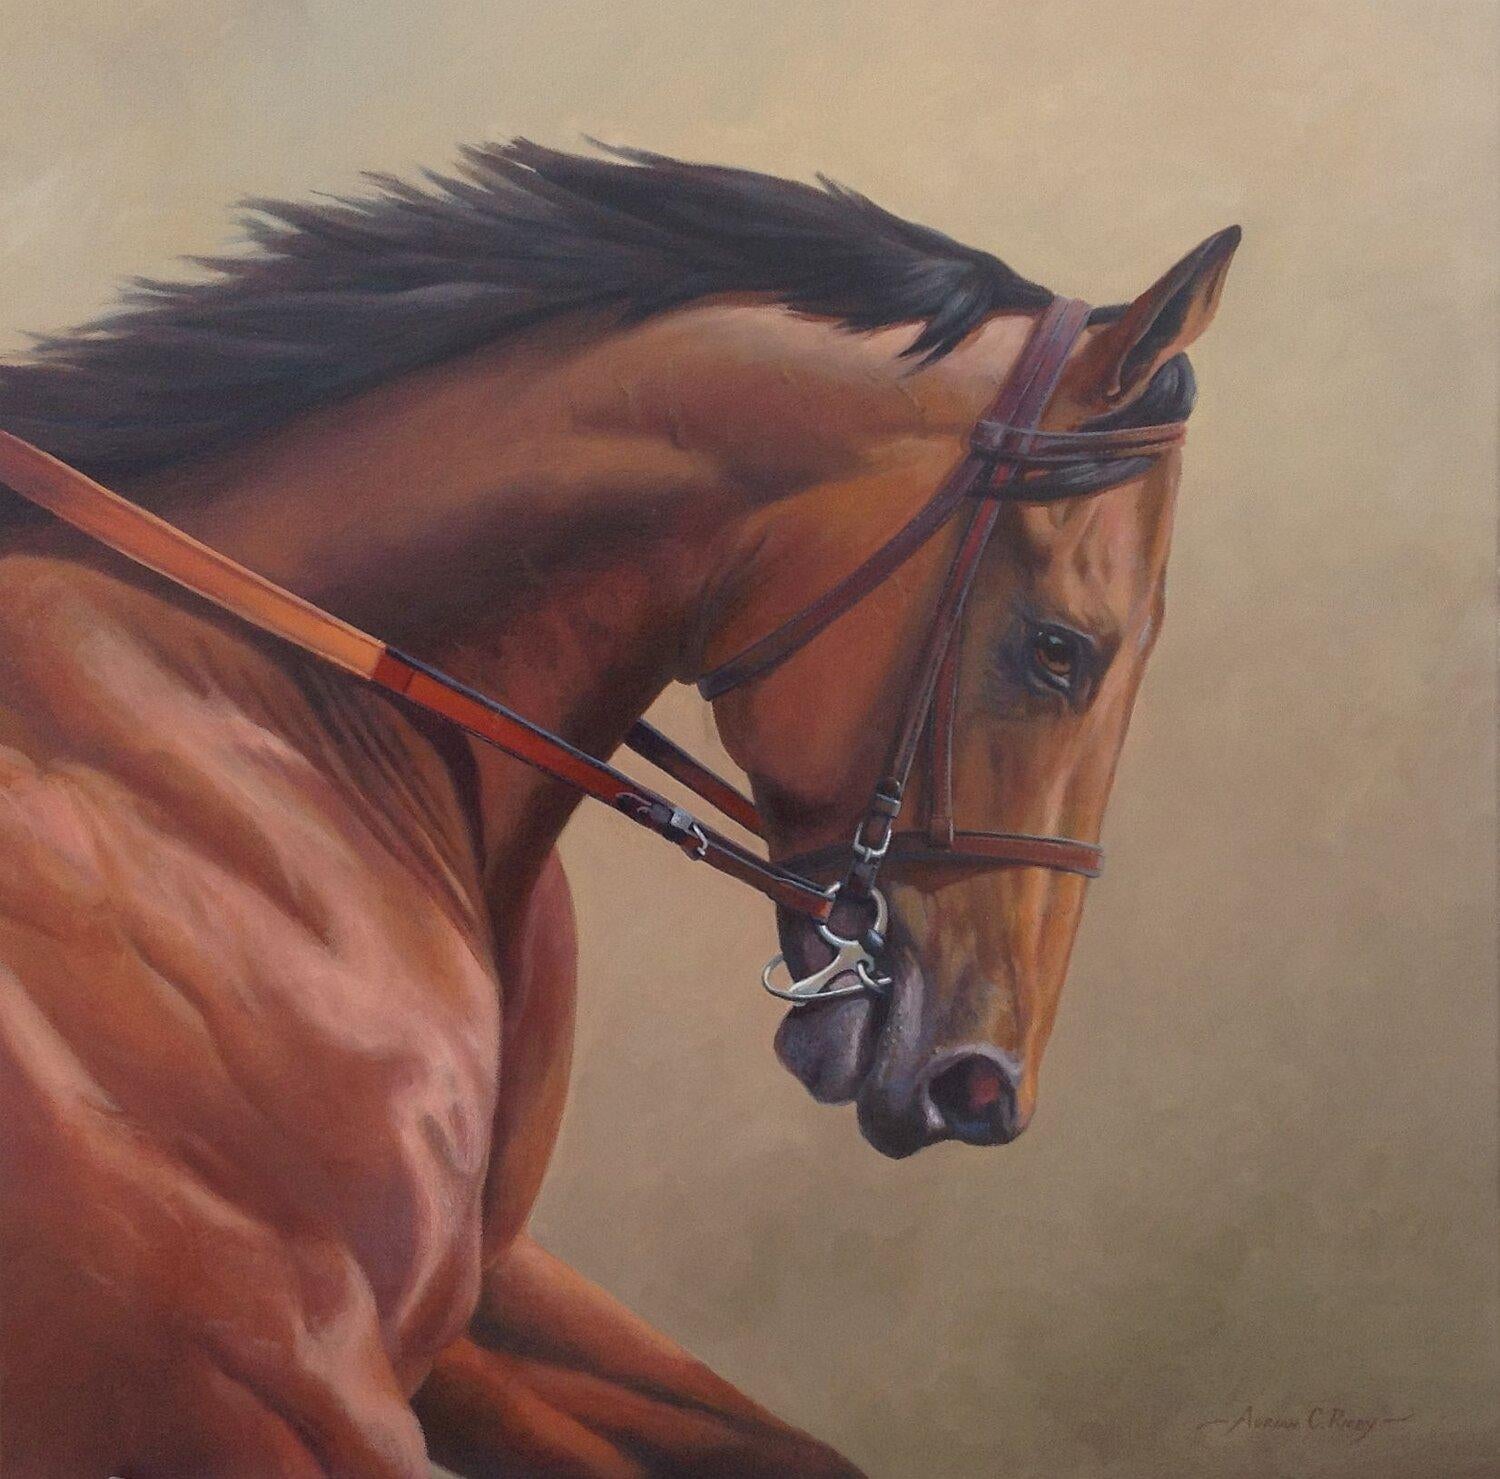 Adrian Rigby, "Grace of a Champion", American Pharoah Horse Oil Painting 